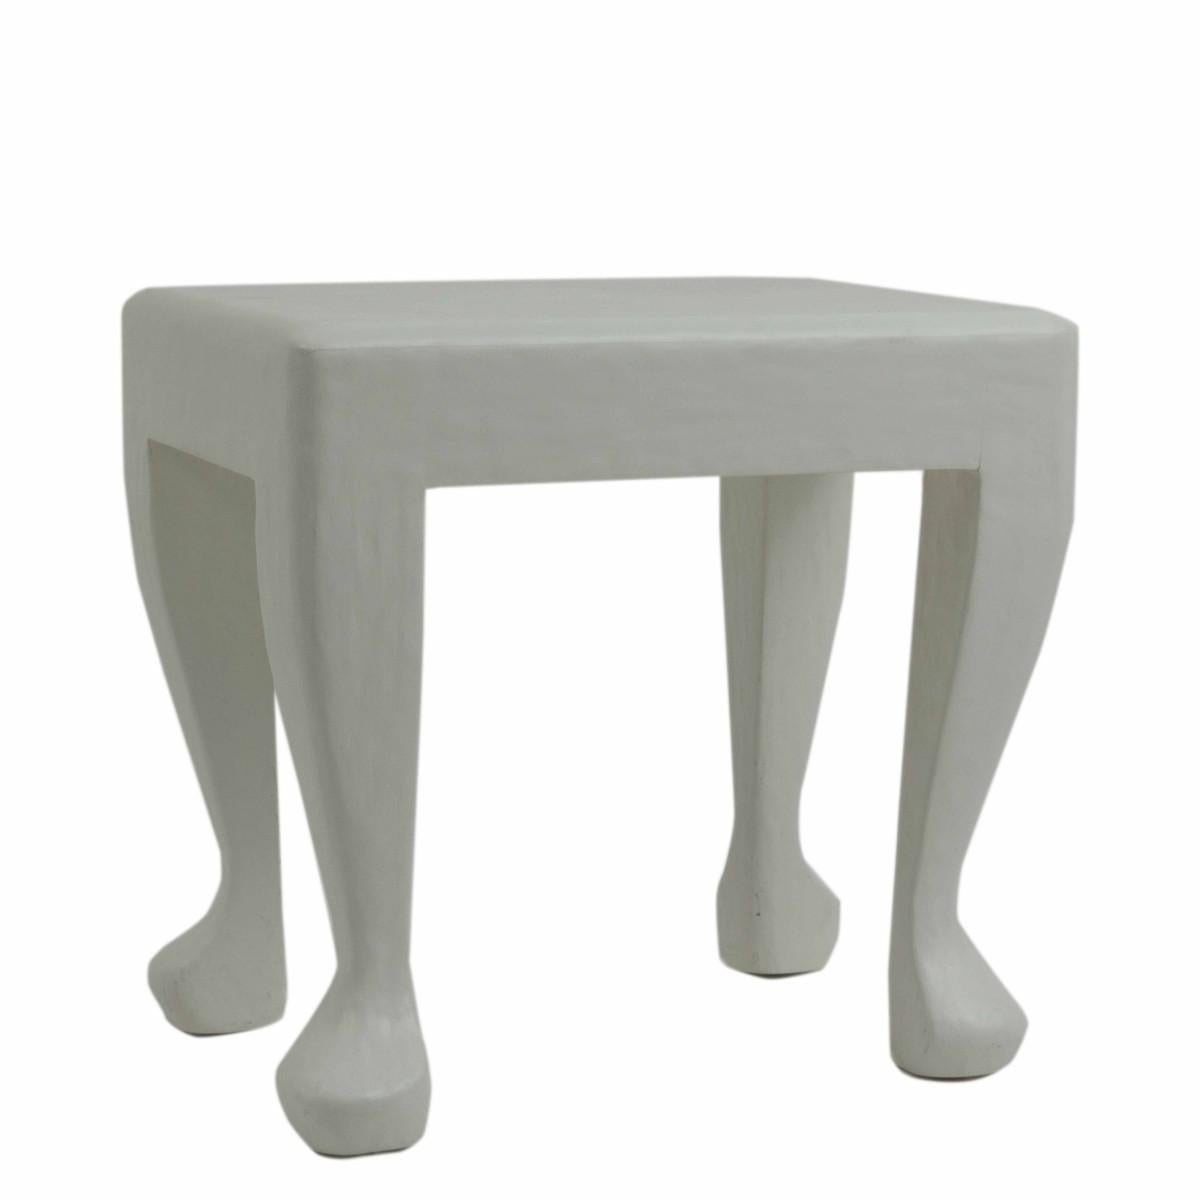 A white plaster / gesso occasional table in the style of John Dickinson's African series. USA, circa 1980.